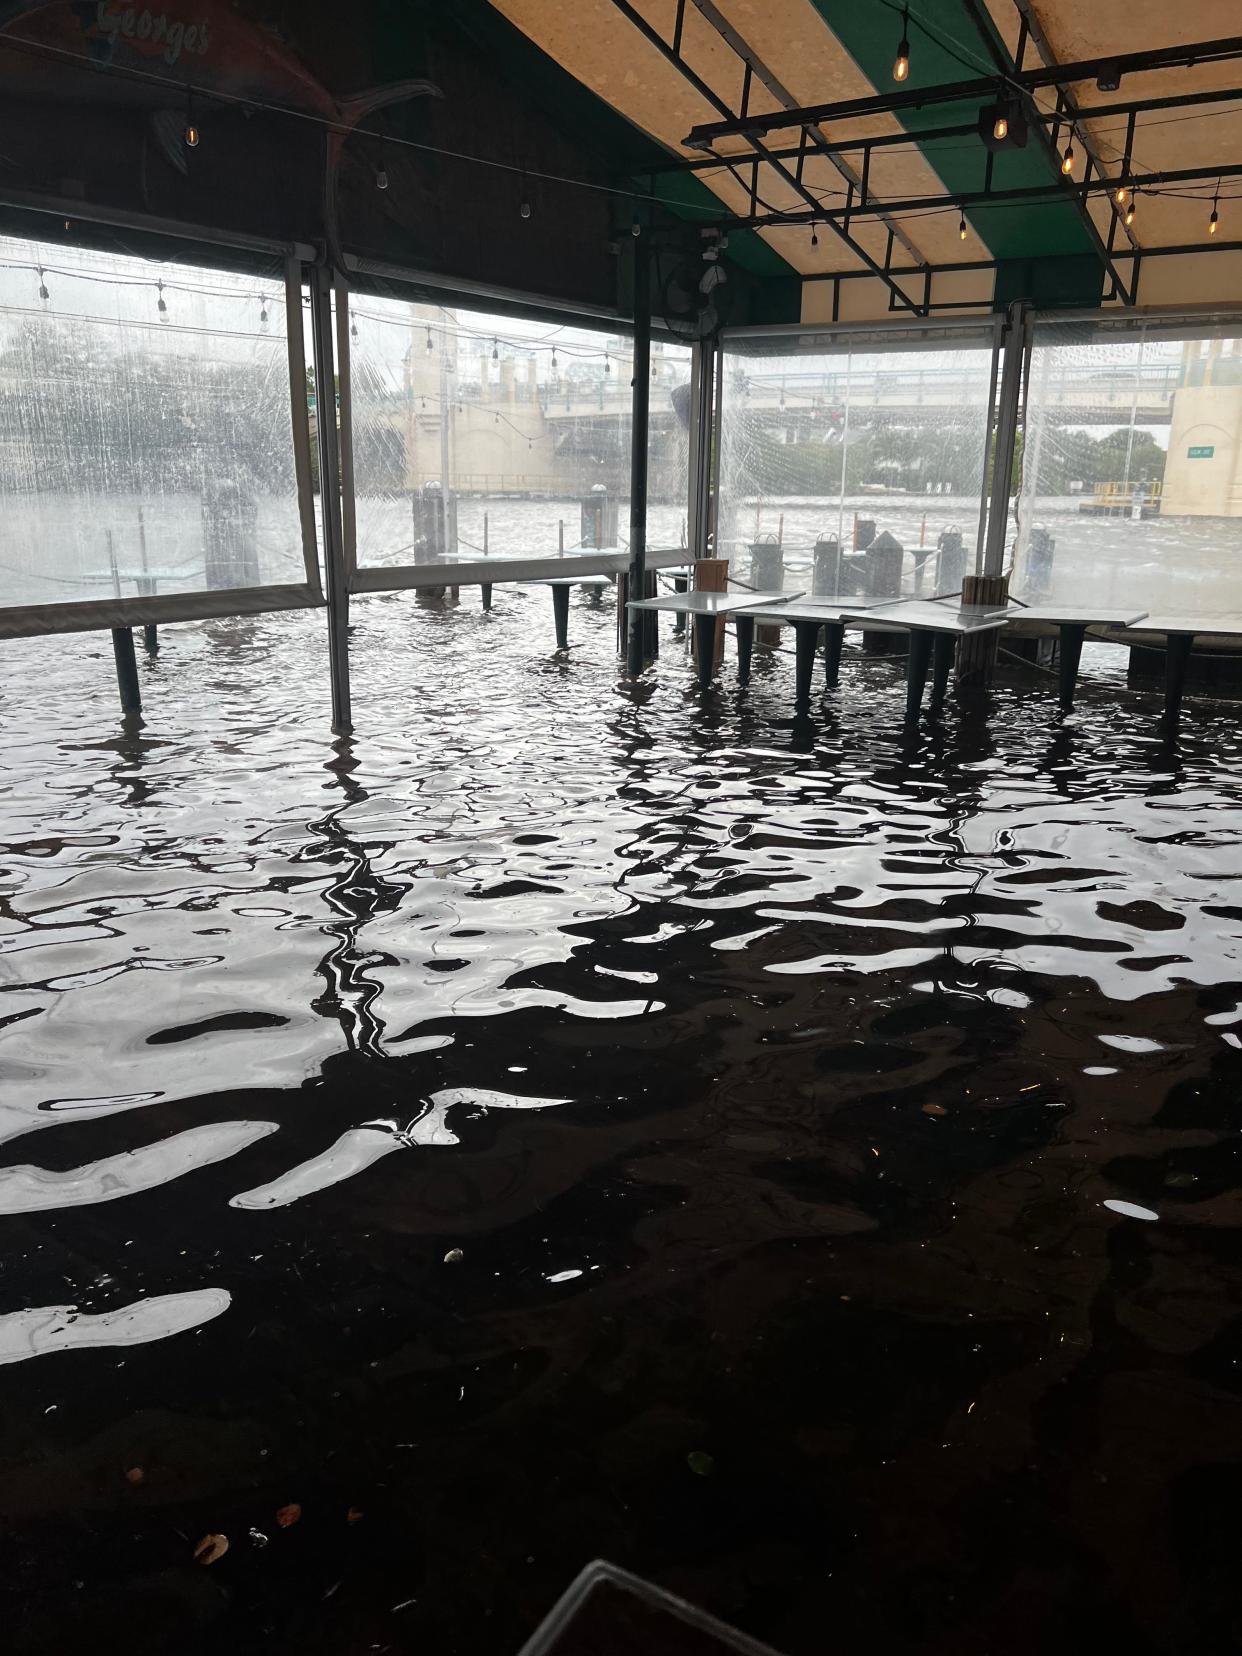 The rising tide from Hurricane Nicole brought water from the Intracoastal Waterway into Two Georges Waterfront Grille in Boynton Beach on Wednesday night.